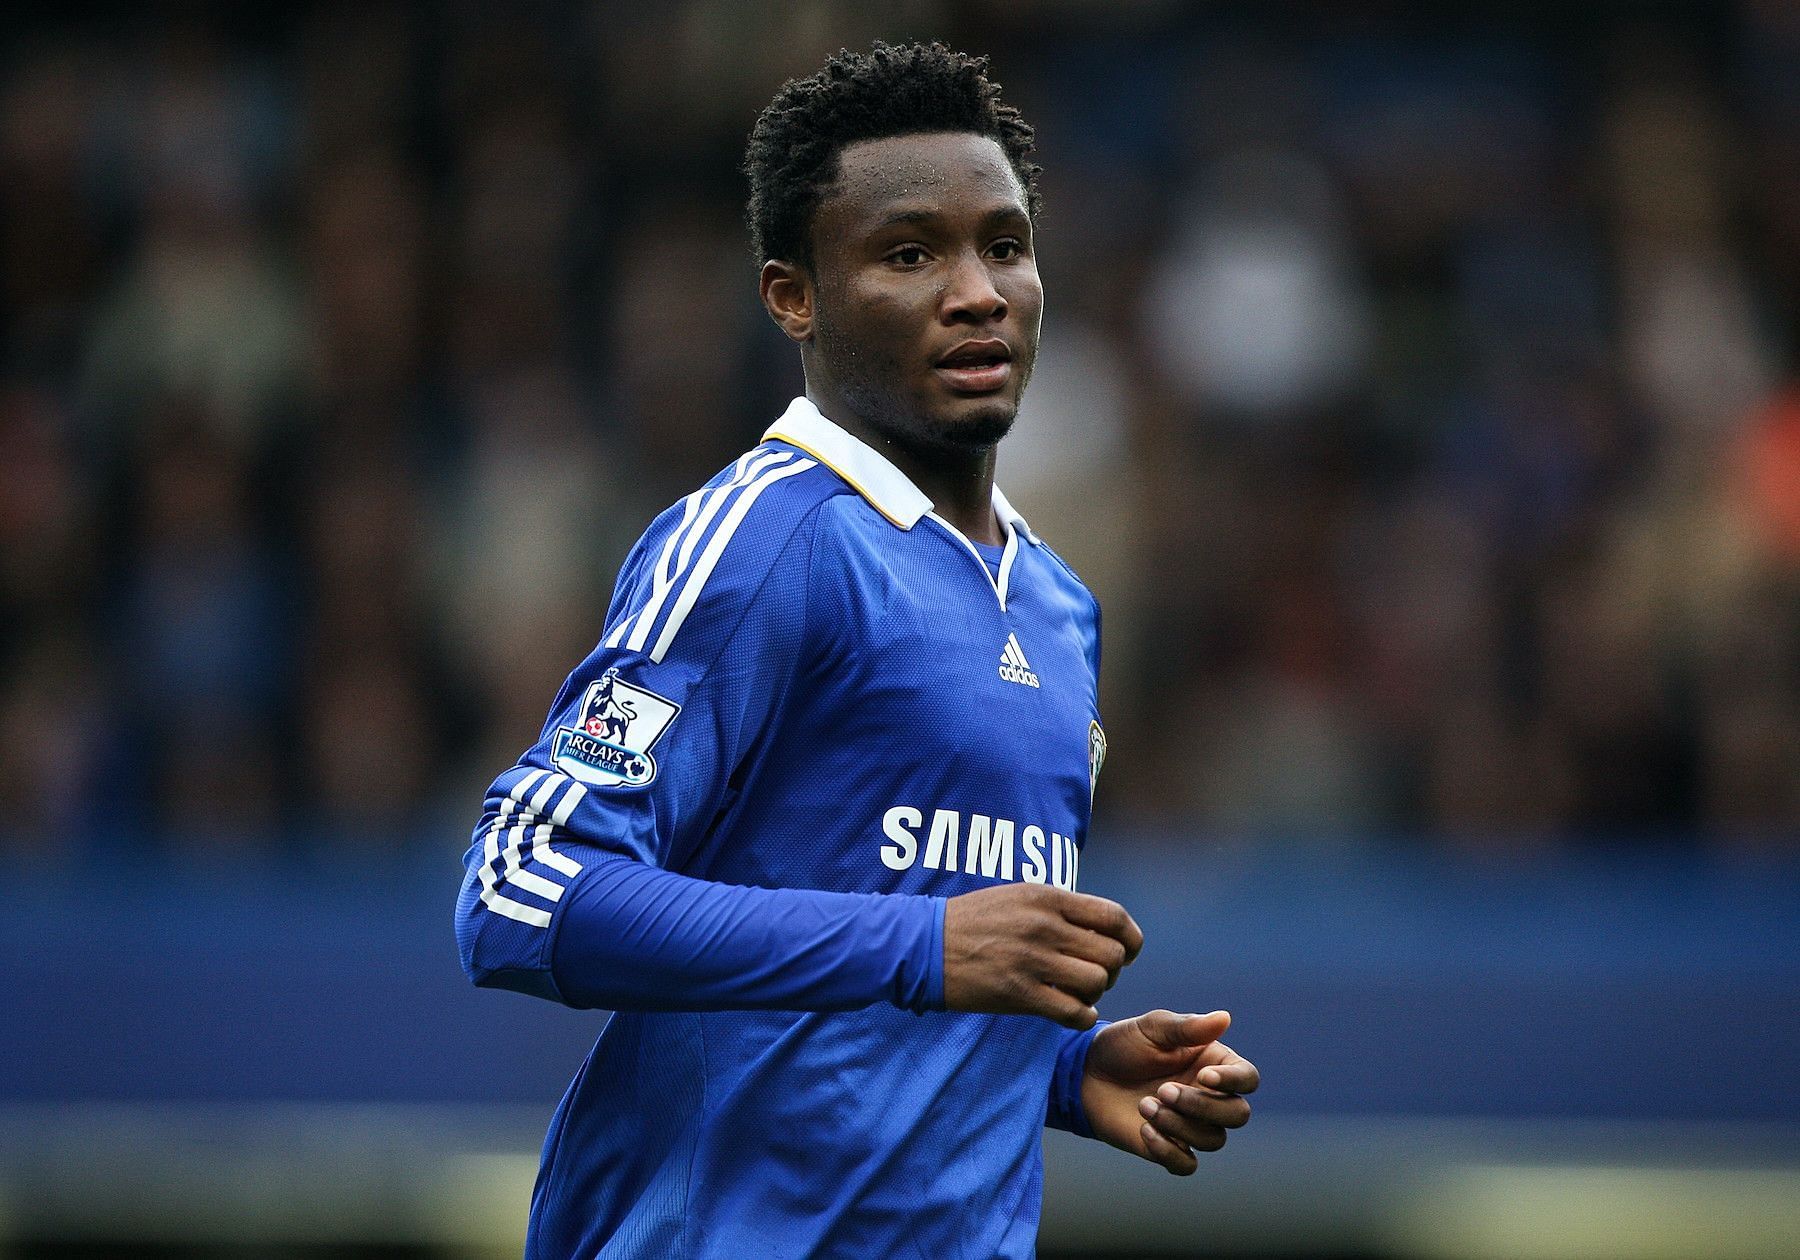 John Obi Mikel in action for Chelsea during a Premier League game